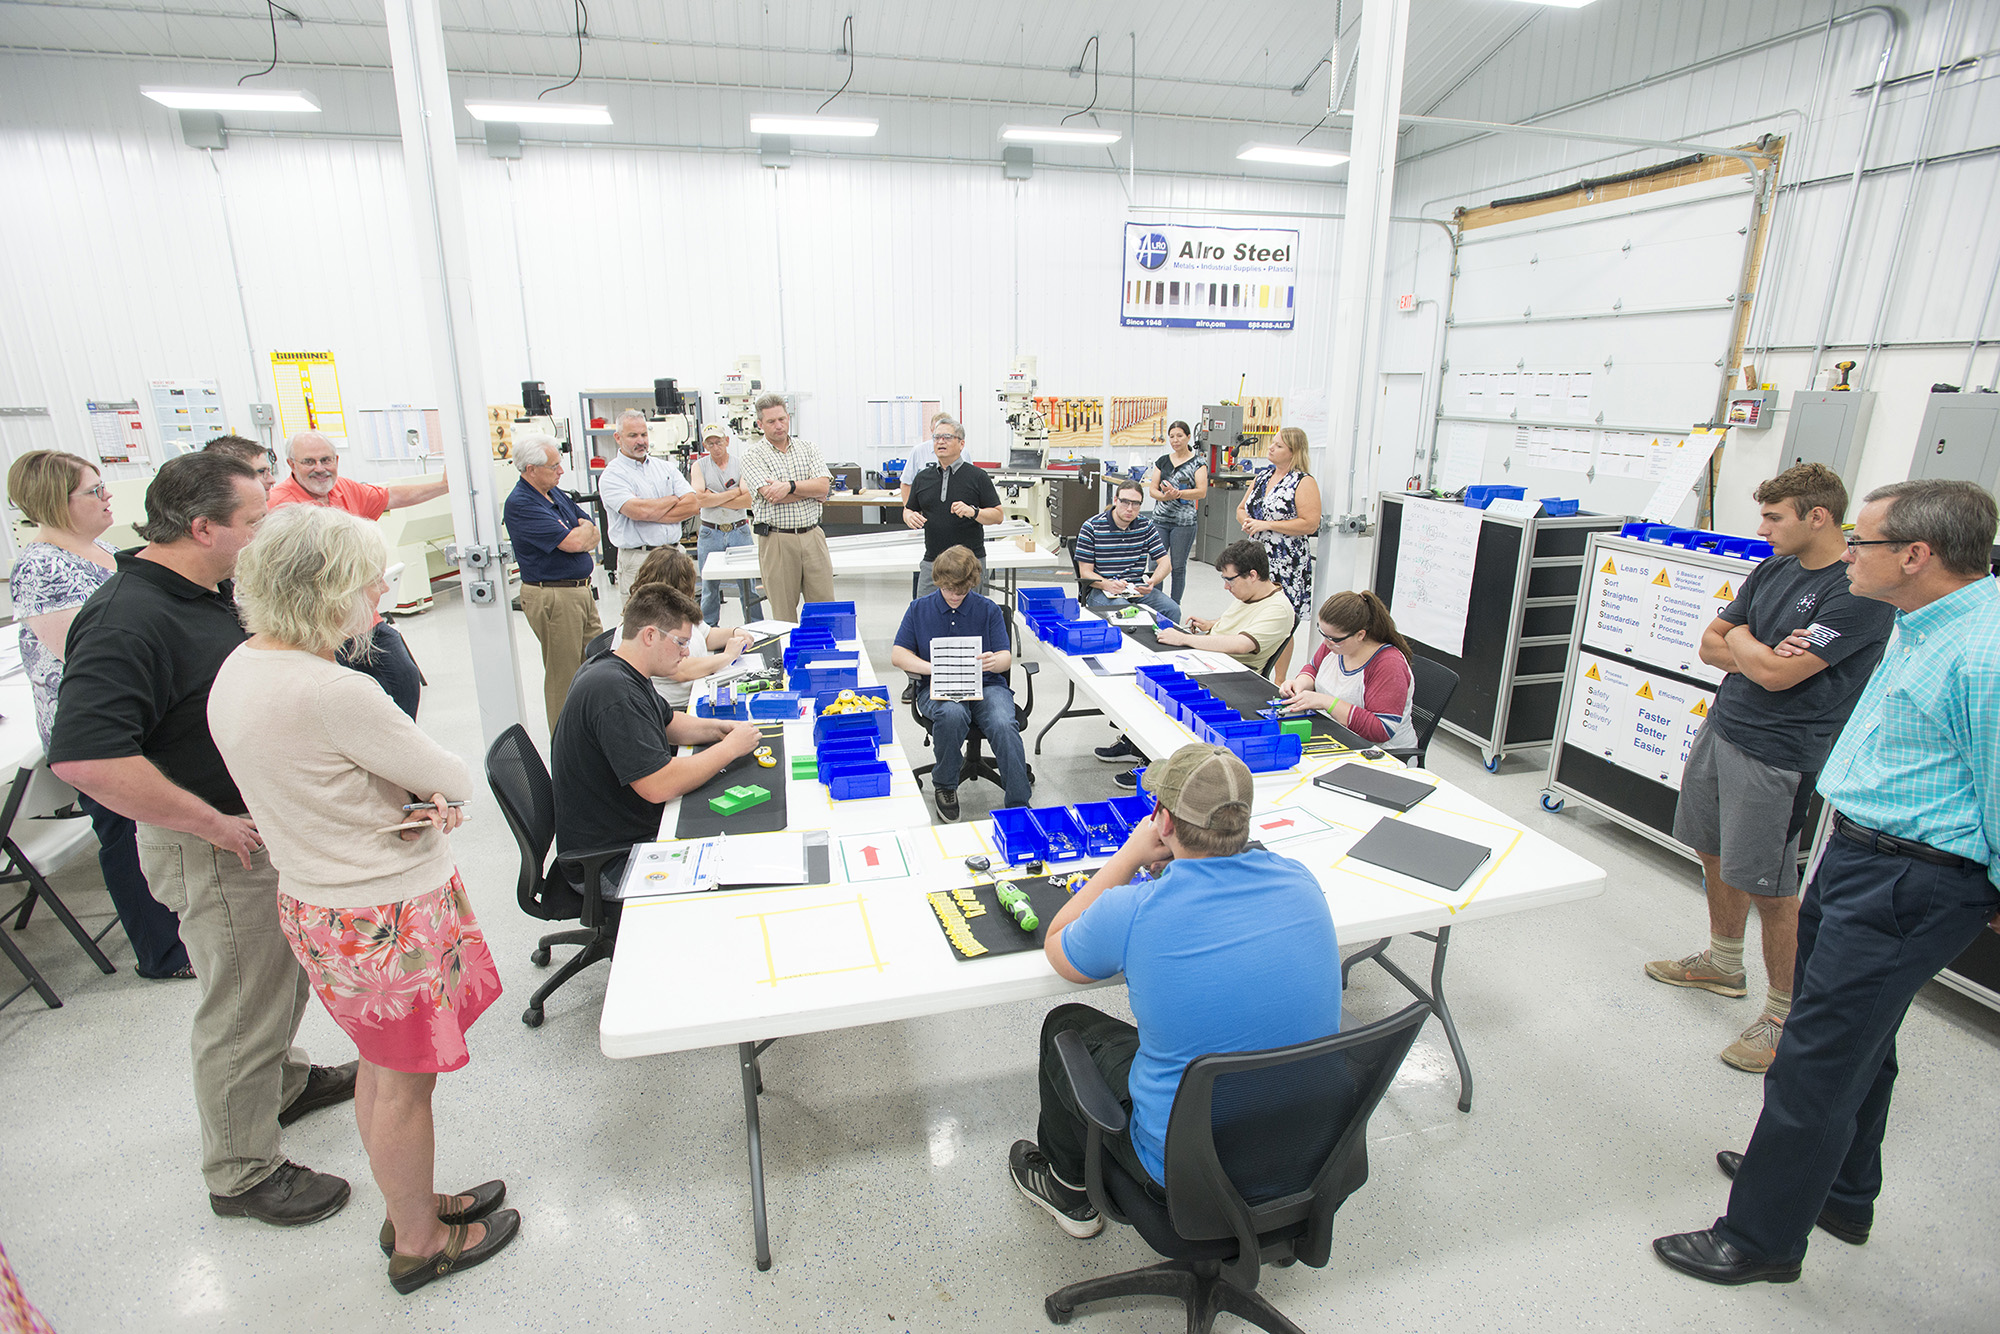 KAMA trainee family members, area employers, program funders and other community partners mingle and speak with the KAMA participants during a production run demonstration held during a meet-and-greet event at TNR Machine, Inc., in Dowling in July.